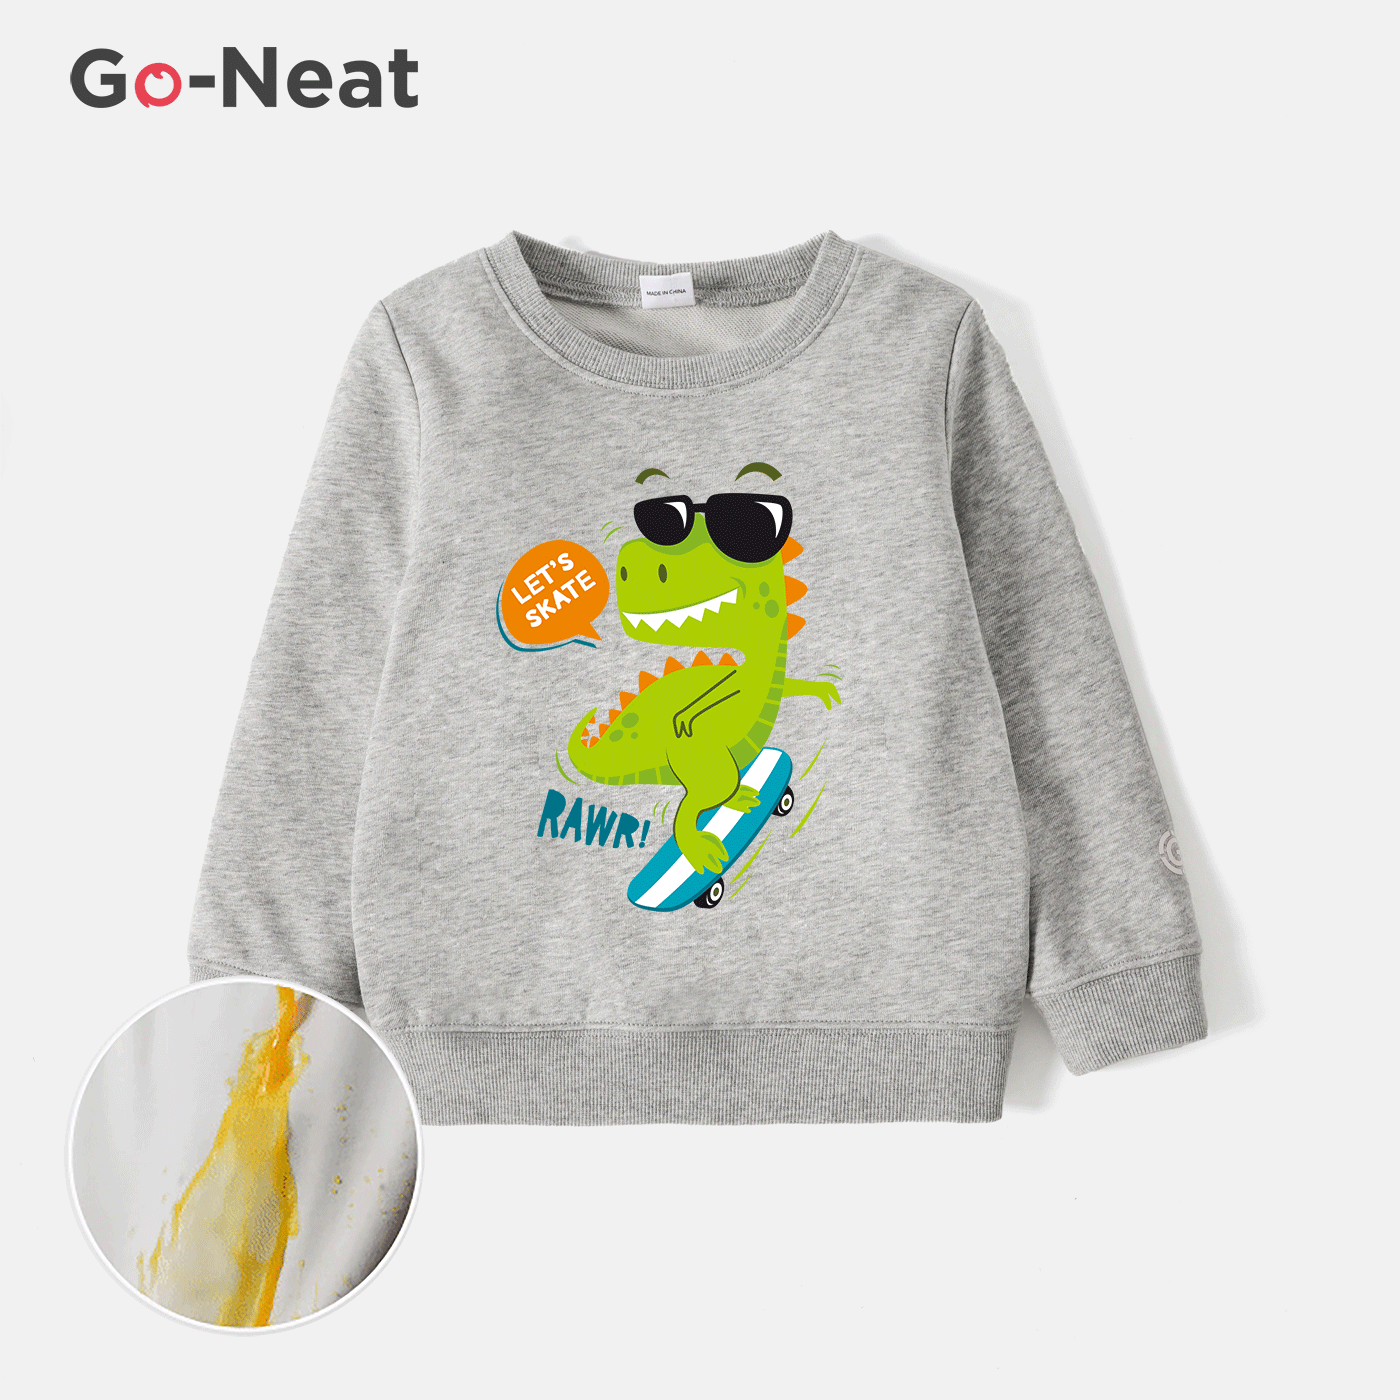 Go-Neat Water Repellent and Stain Resistant Sibling Matching Dinosaur Print Long-sleeve Sweatshirt Grey image 1